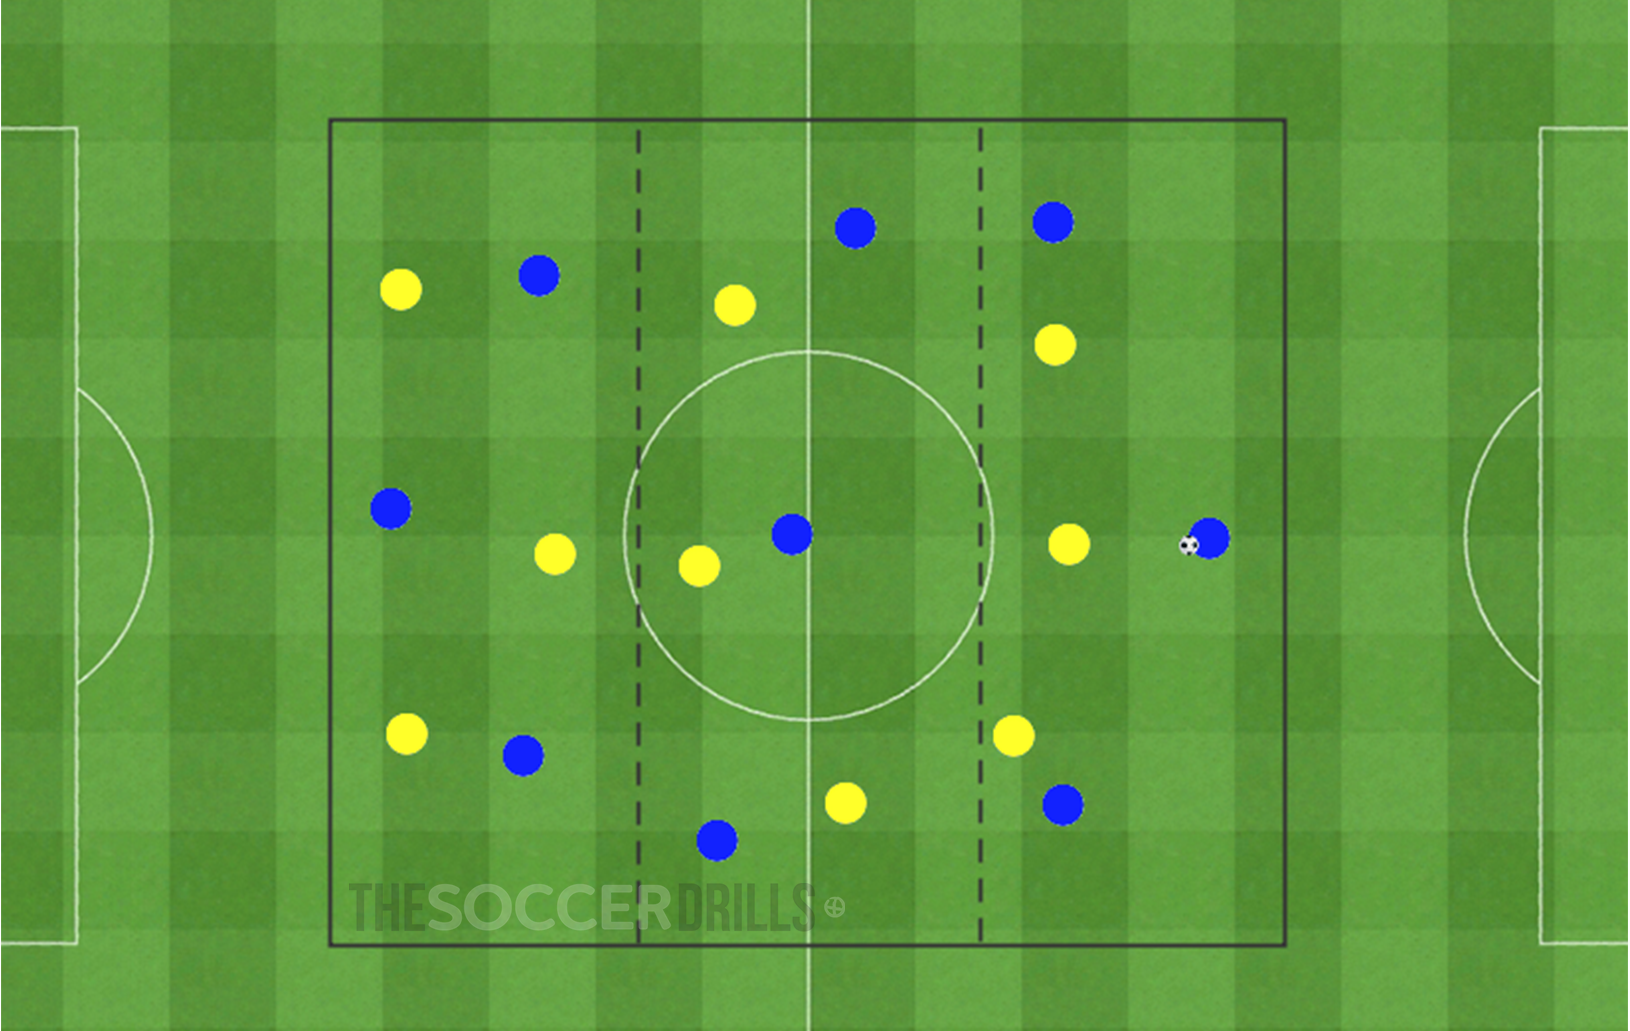 Soccer Drills for coaches, Soccer Drills for kds, Tactical Football Exercises, Tacical Soccer Drills, Drills for counterattack, Possesion  possesion drills soccer, Small-Sided Soccer Games,